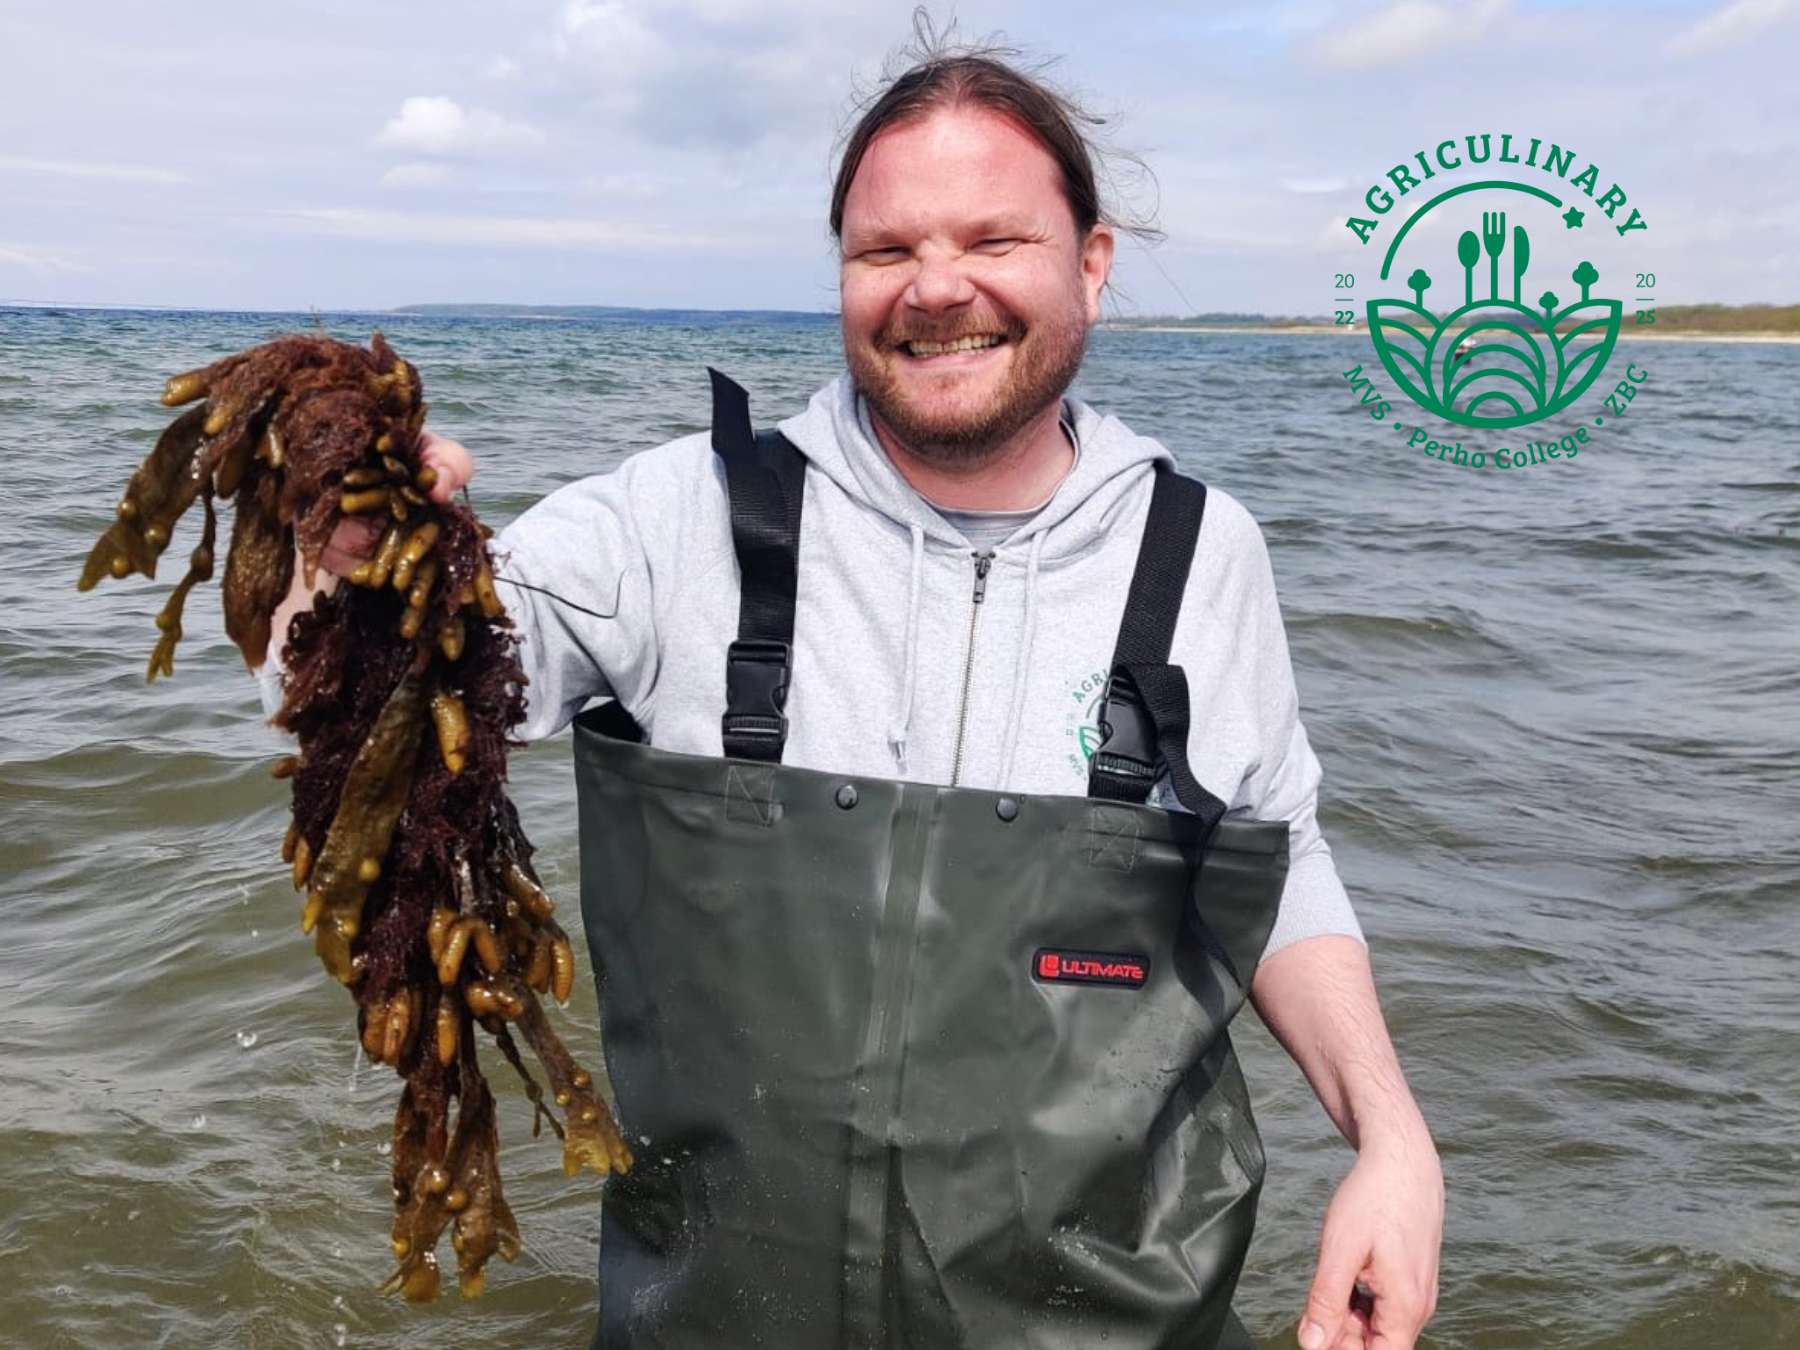 A man shows kelp that he collects from the Baltic Sea on the coast of Denmark.